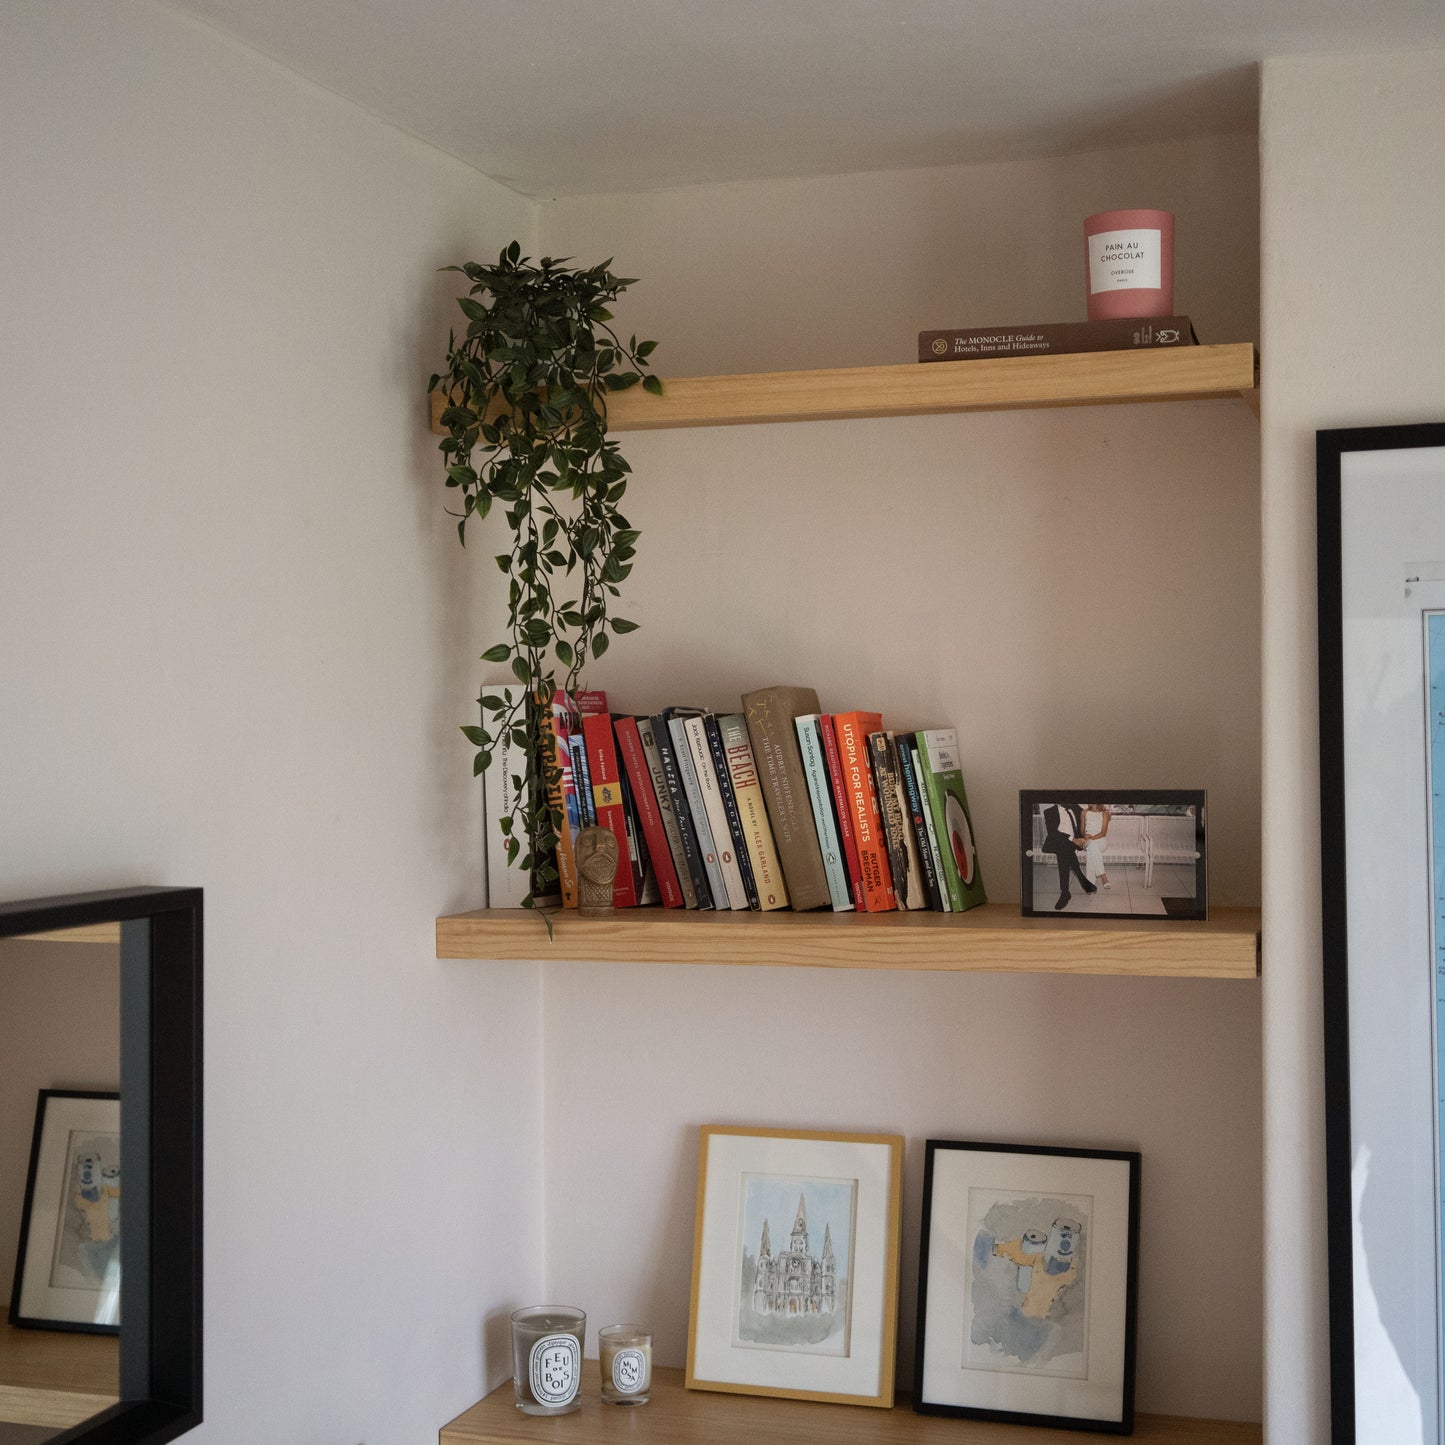 Solid Wood Alcove Floating Shelves - 85 cm by 28 cm